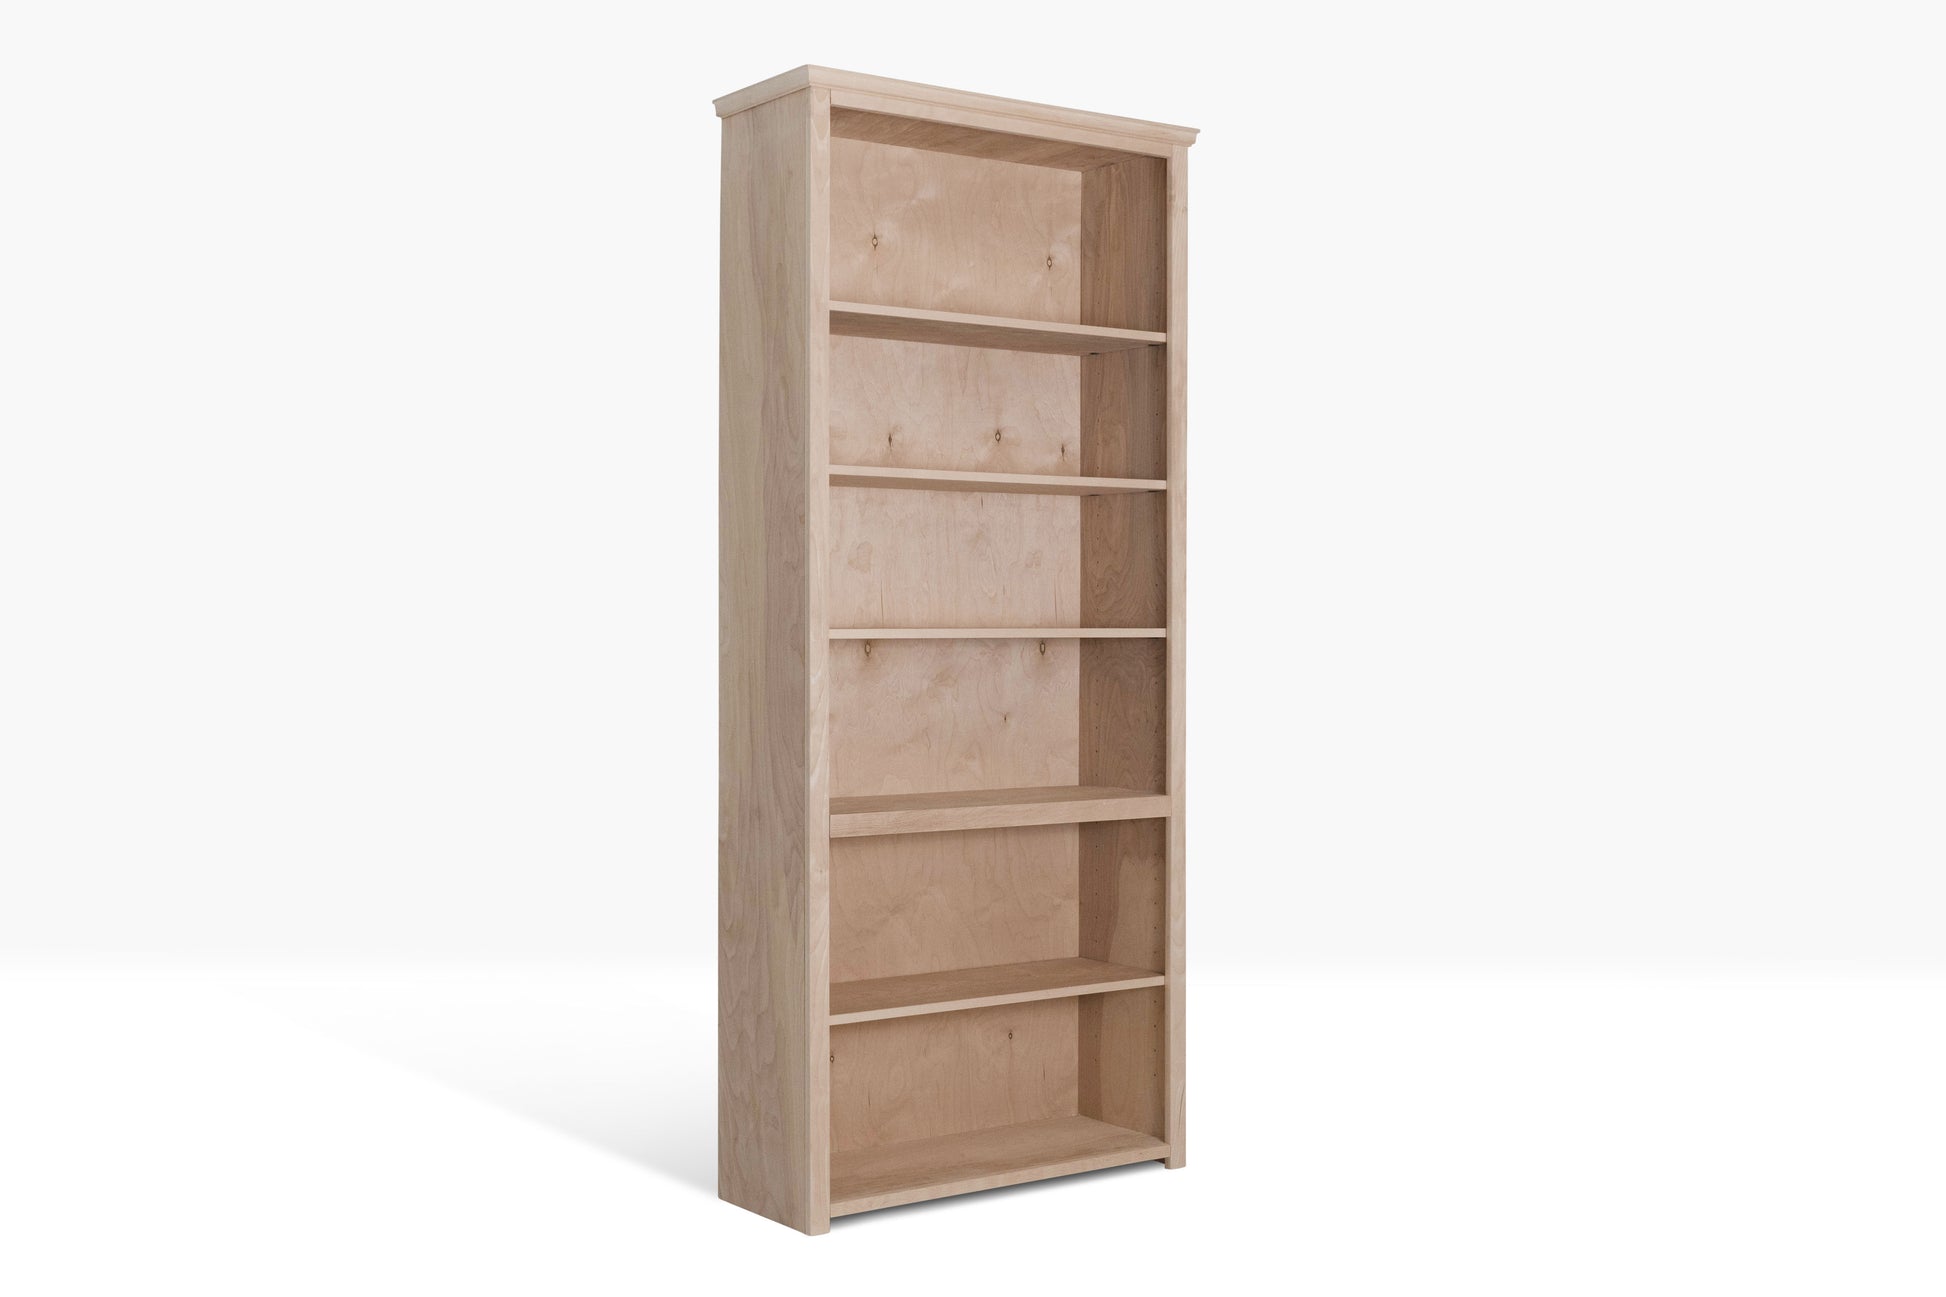 Berkshire Plymouth Bookcase, pictured unfinished with adjustable birch shelving and construction.